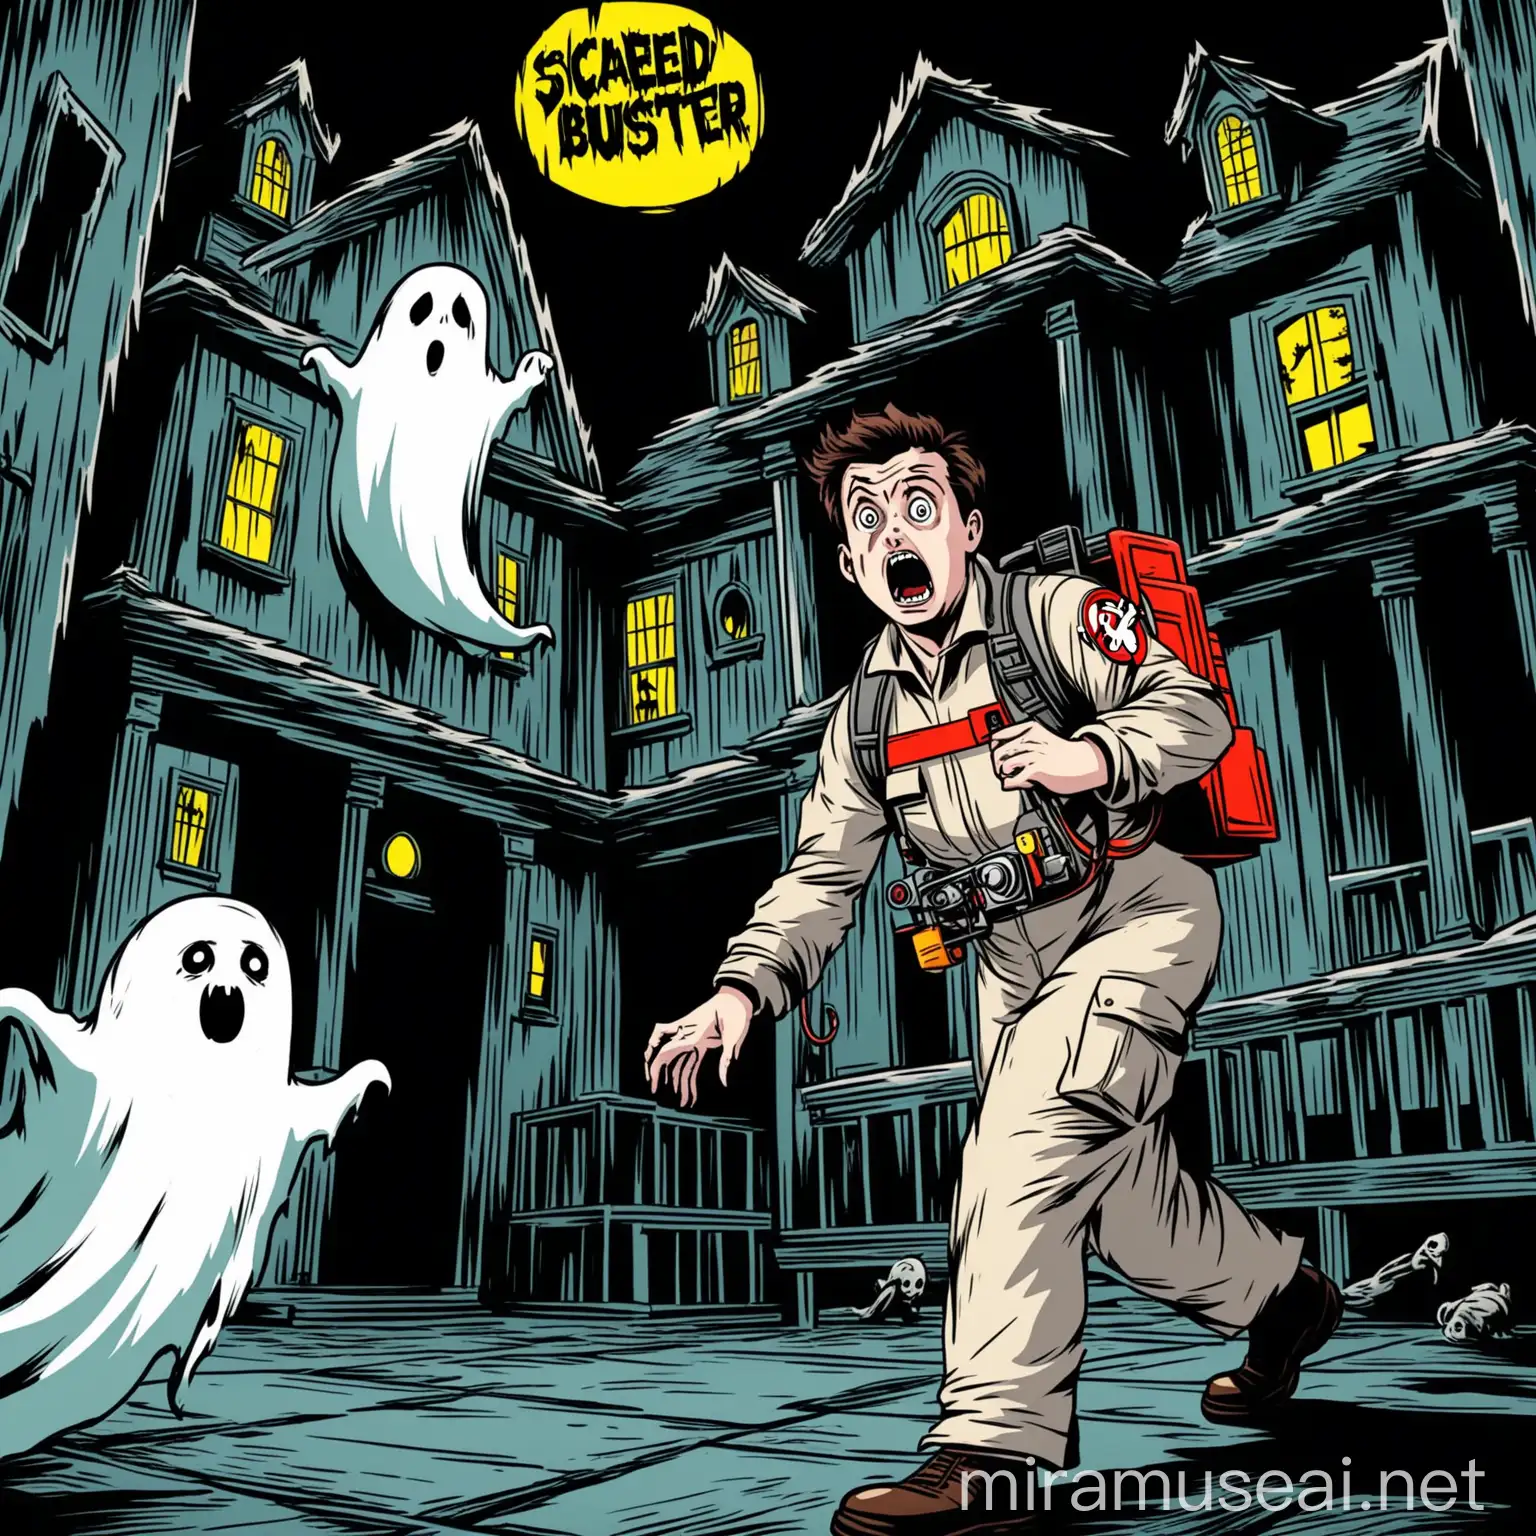 Comic style picture of scared ghostbuster in haunted house with ghost in the background